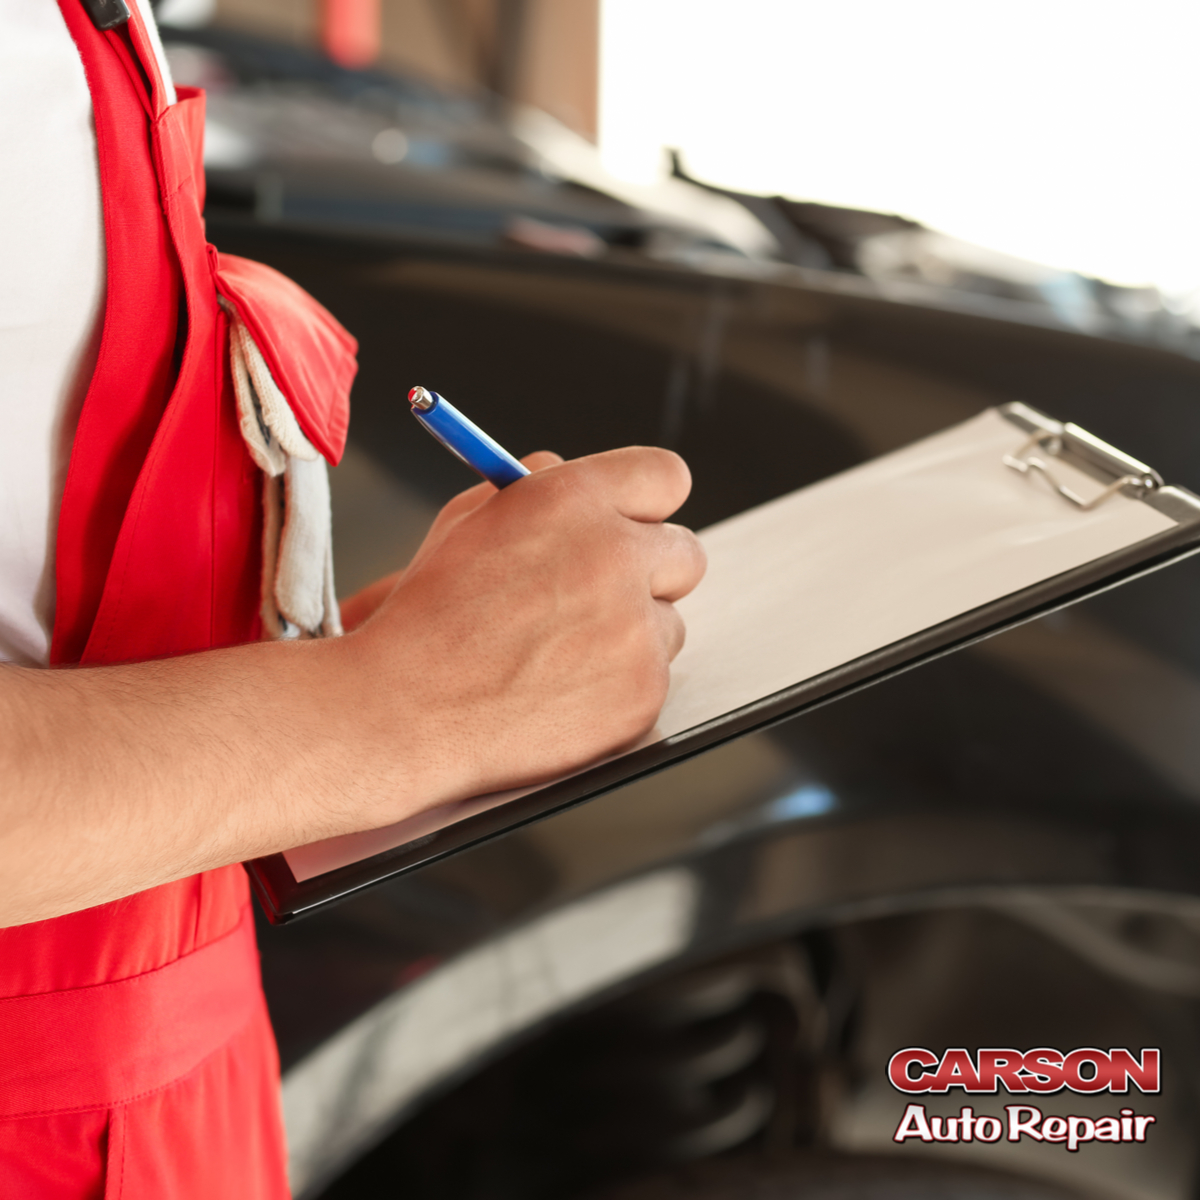 Car Repairs Can Be as Easy as Making an Appointment for a Routine Inspection!